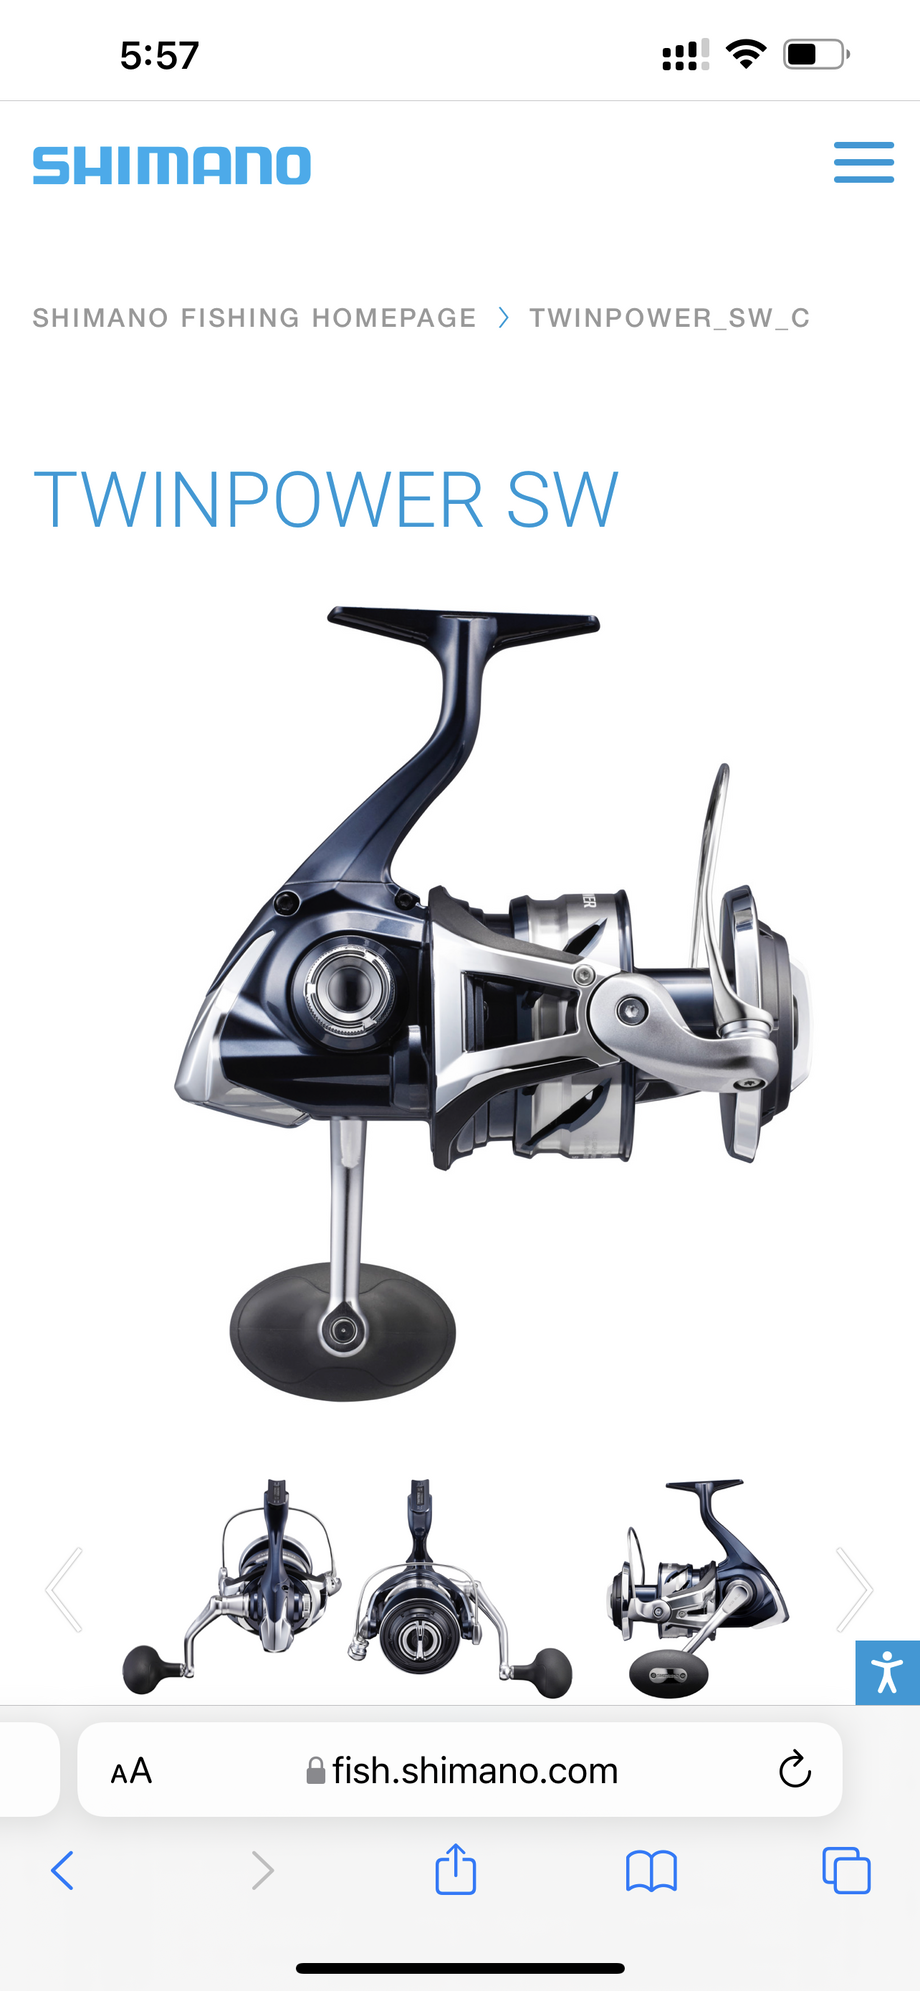 Shimano Twinpower 10k vs 14k - The Hull Truth - Boating and Fishing Forum